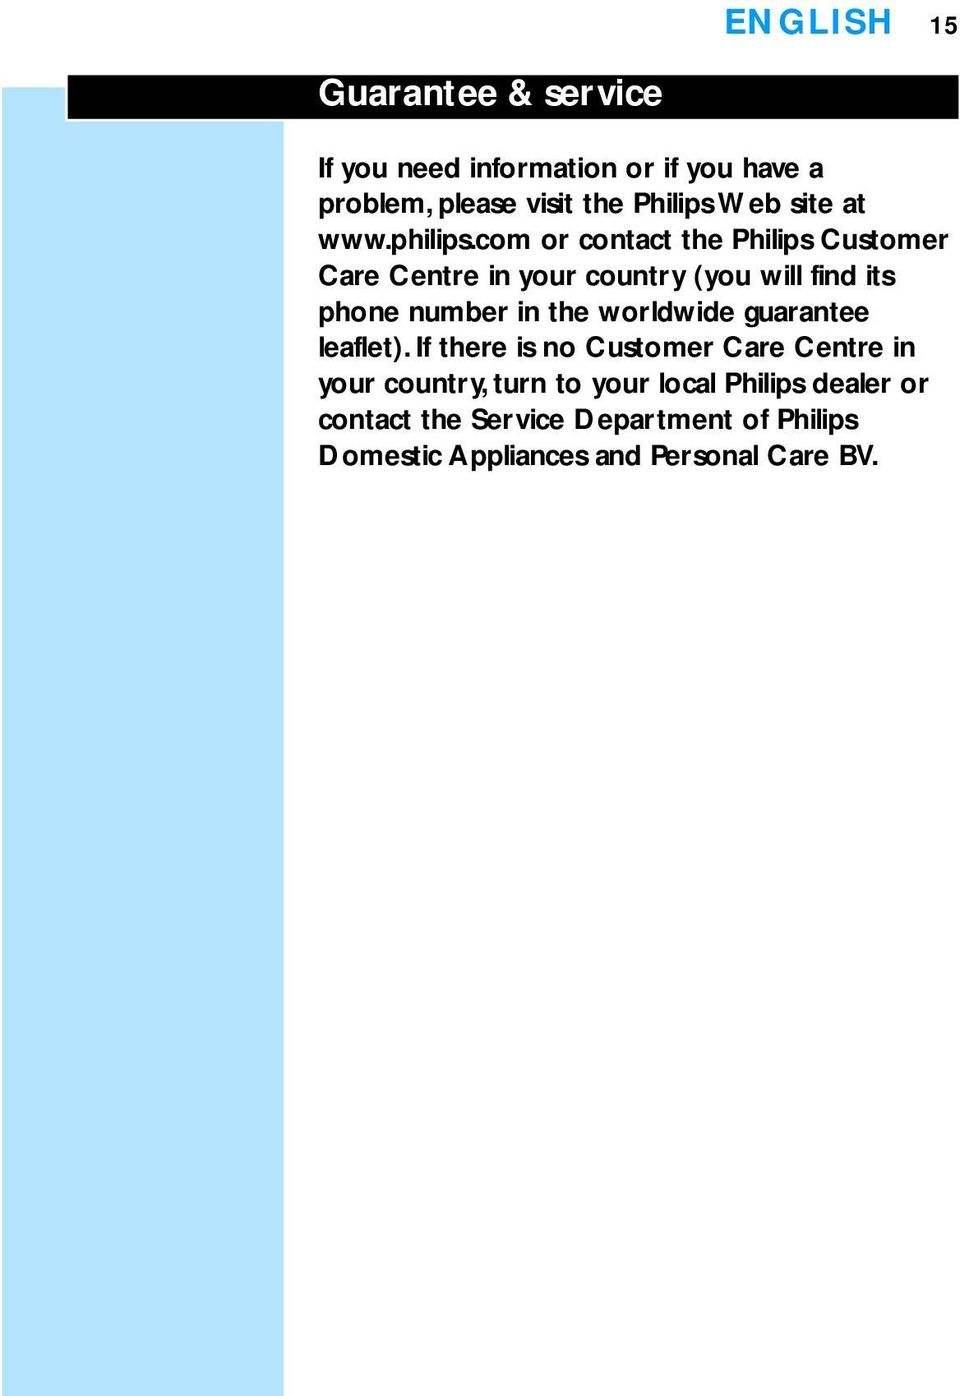 com or contact the Philips Customer Care Centre in your country (you will find its phone number in the